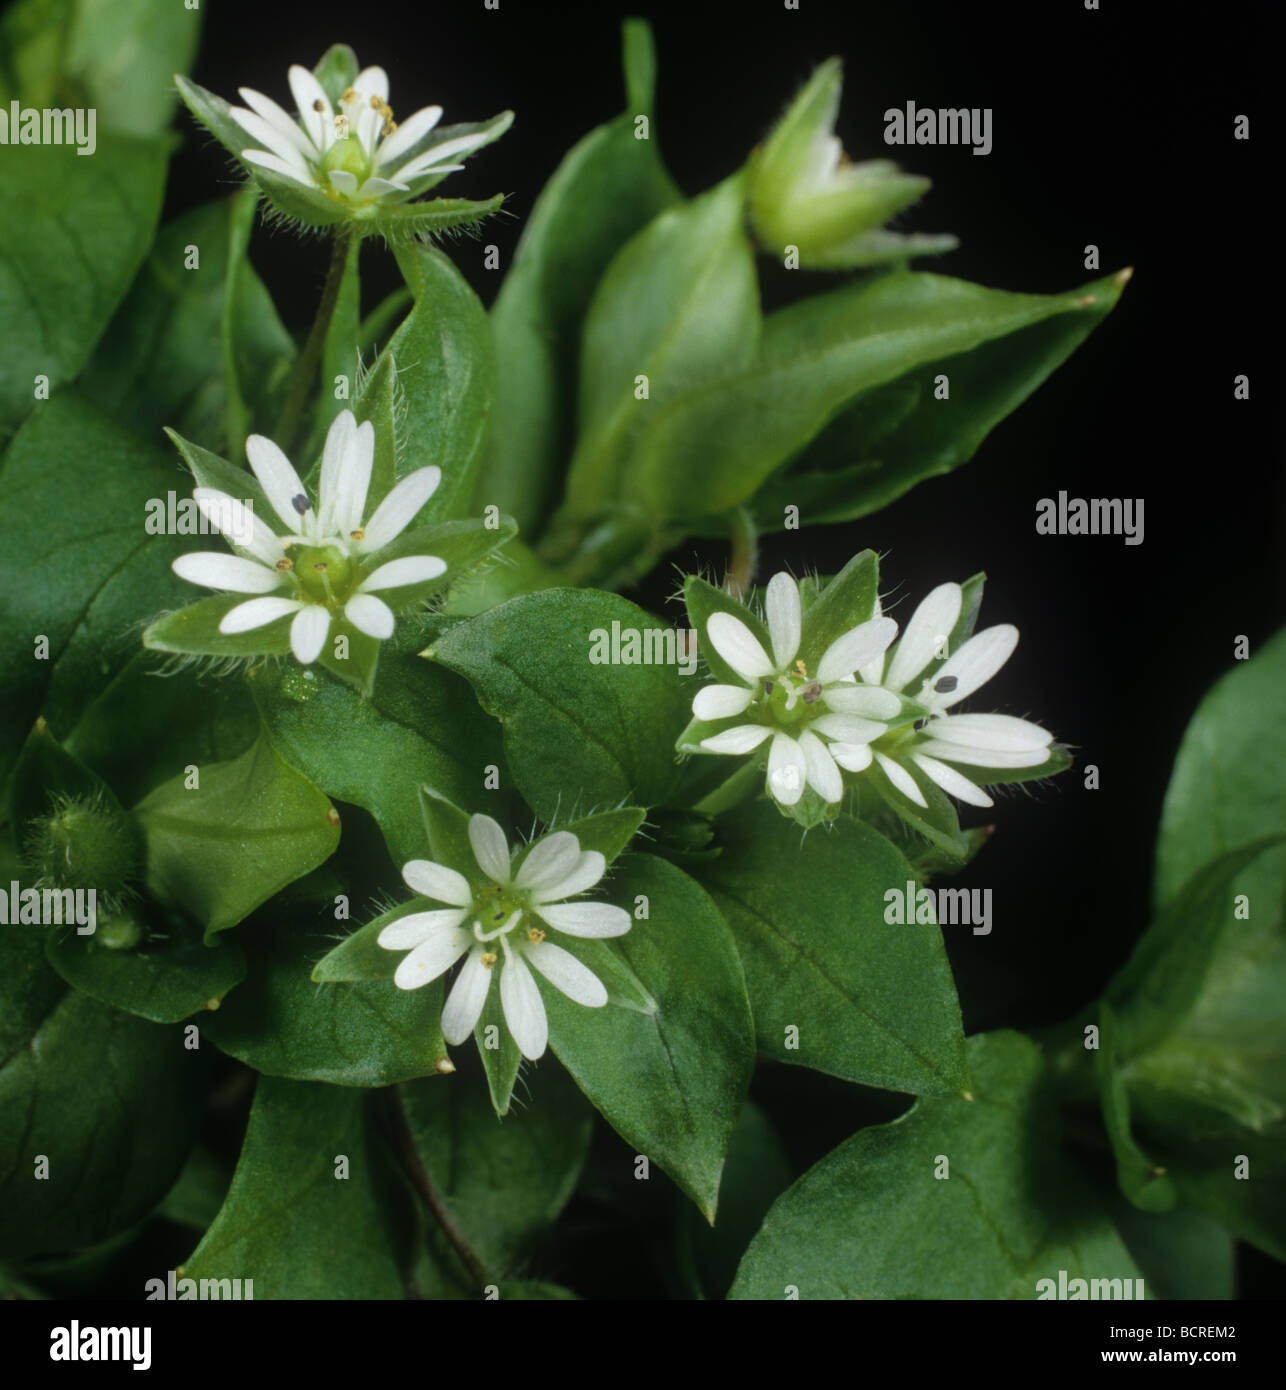 Chickweed Stellaria media flowers in close up Stock Photo